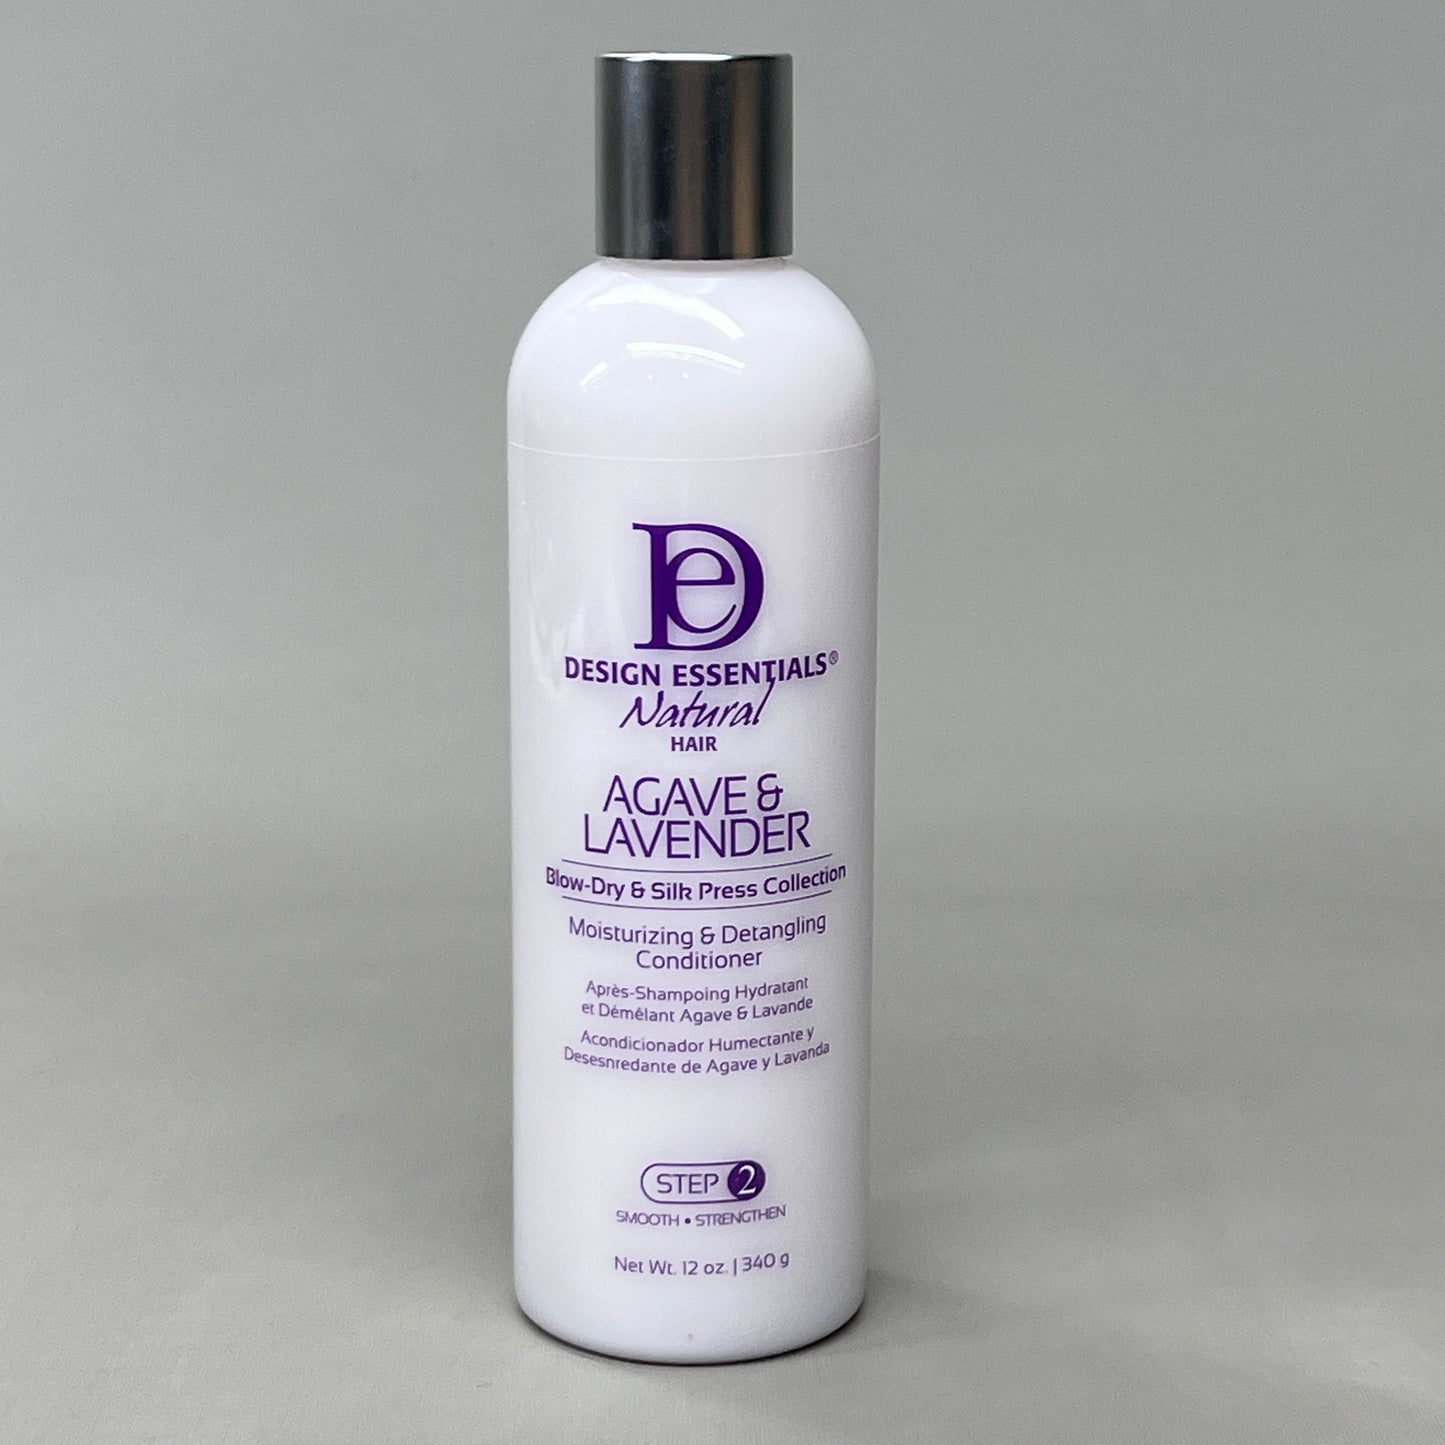 DESIGN ESSENTIALS Natural Hair Agave & Lavender Blow Dry Conditioner 12 oz 02/25 (New)